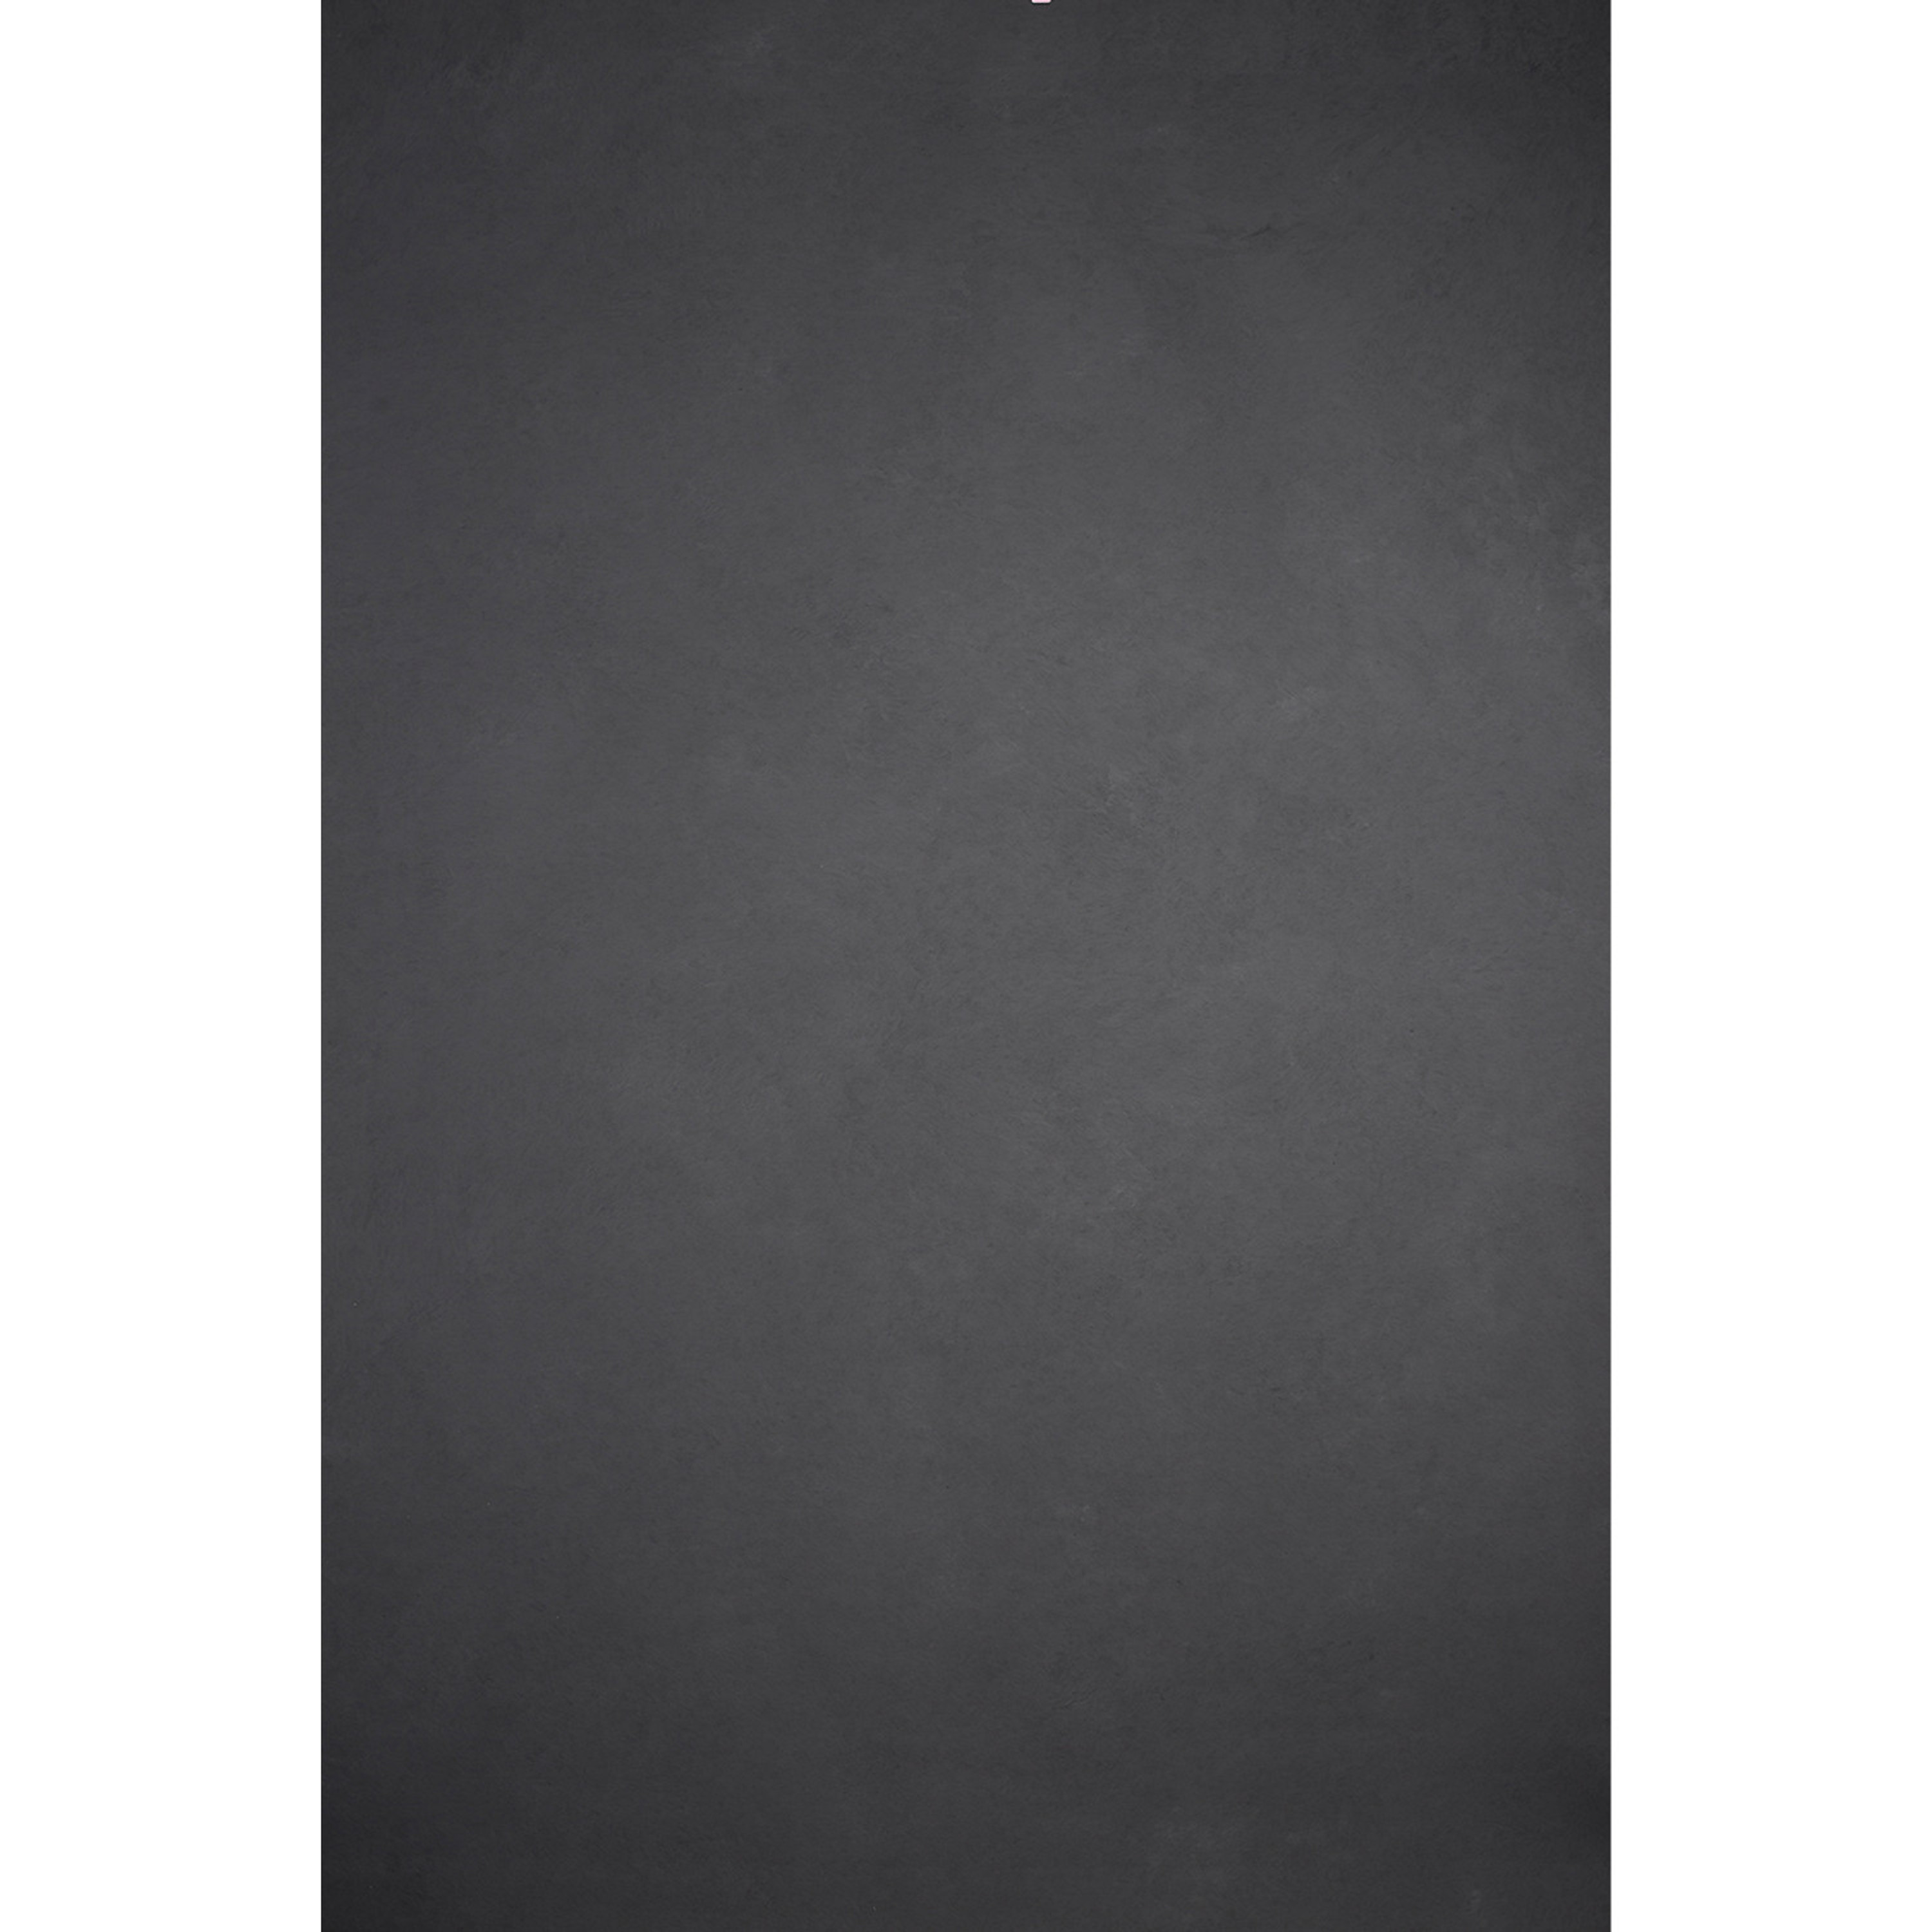 Gravity Backdrops Mid Gray Low Texture M (SN: 7647)